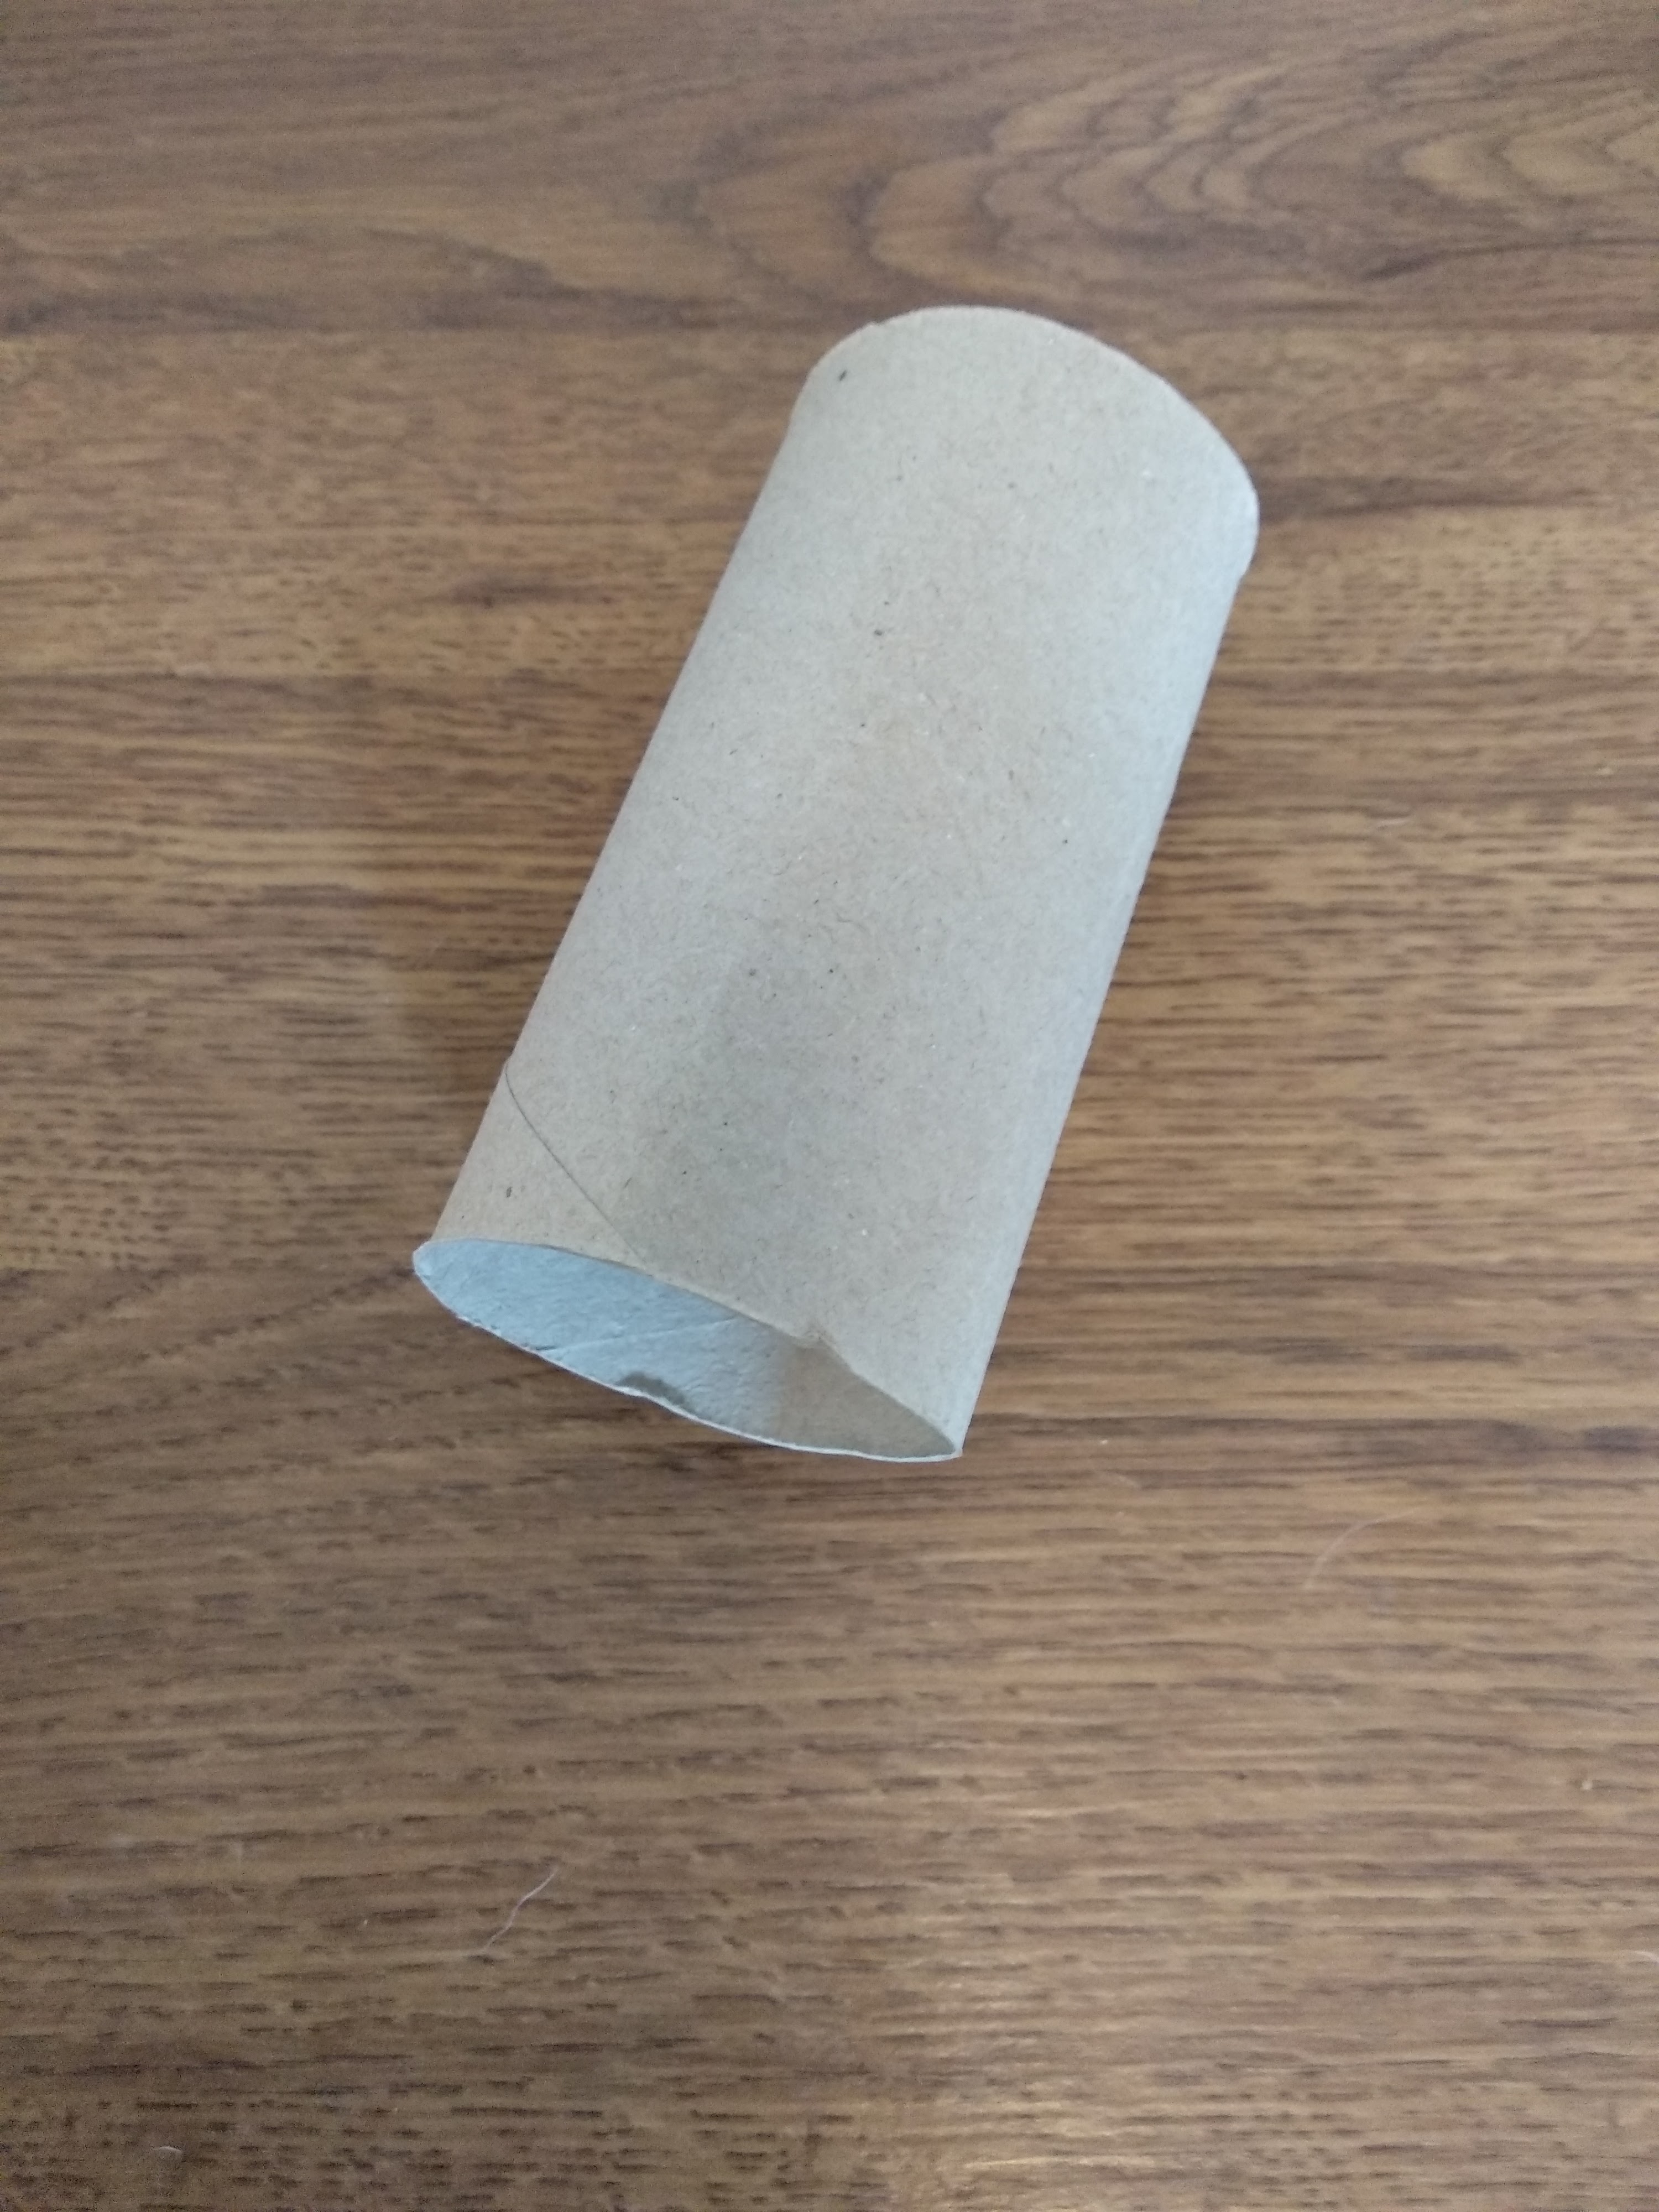 Simple archery face from toilet paper roll insert